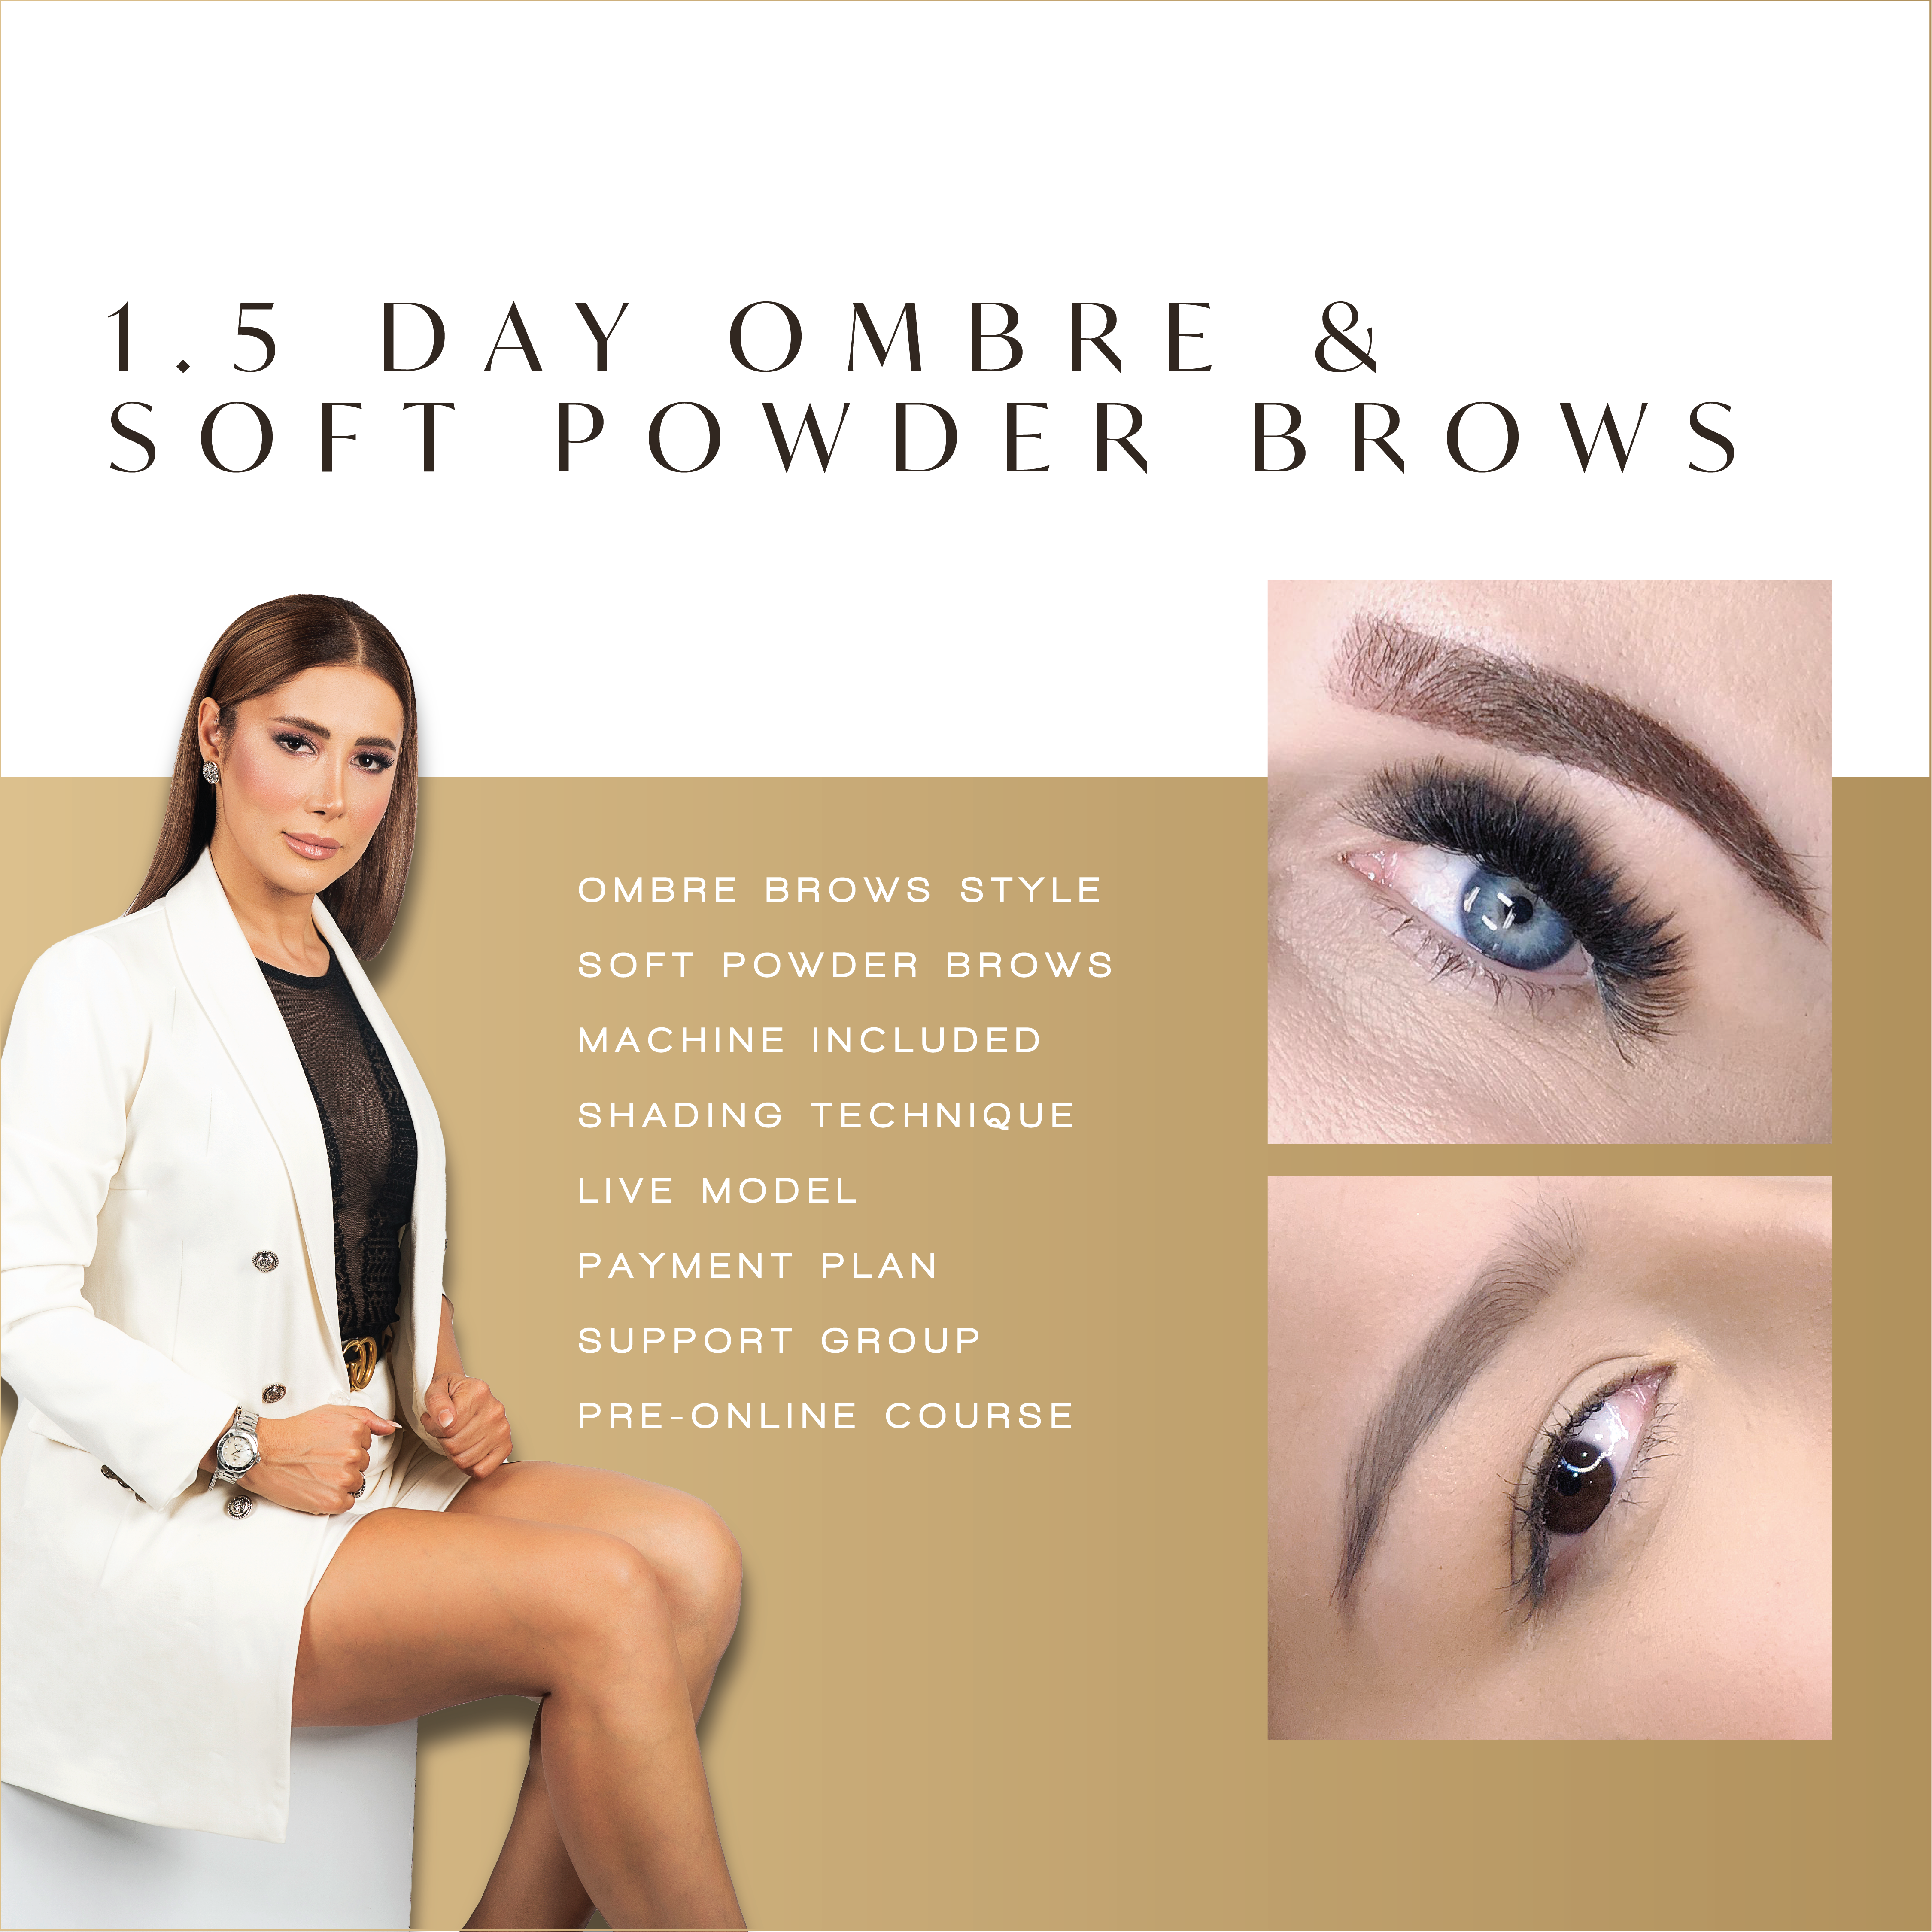 Become a Queen  Queen Brows Academy  Cosmetic Tattoo Course Melbourne  eyebrow  tattoo training  cosmetic tattoo course tafe  diploma in cosmetic  tattooing  best cosmetic tattooing training 